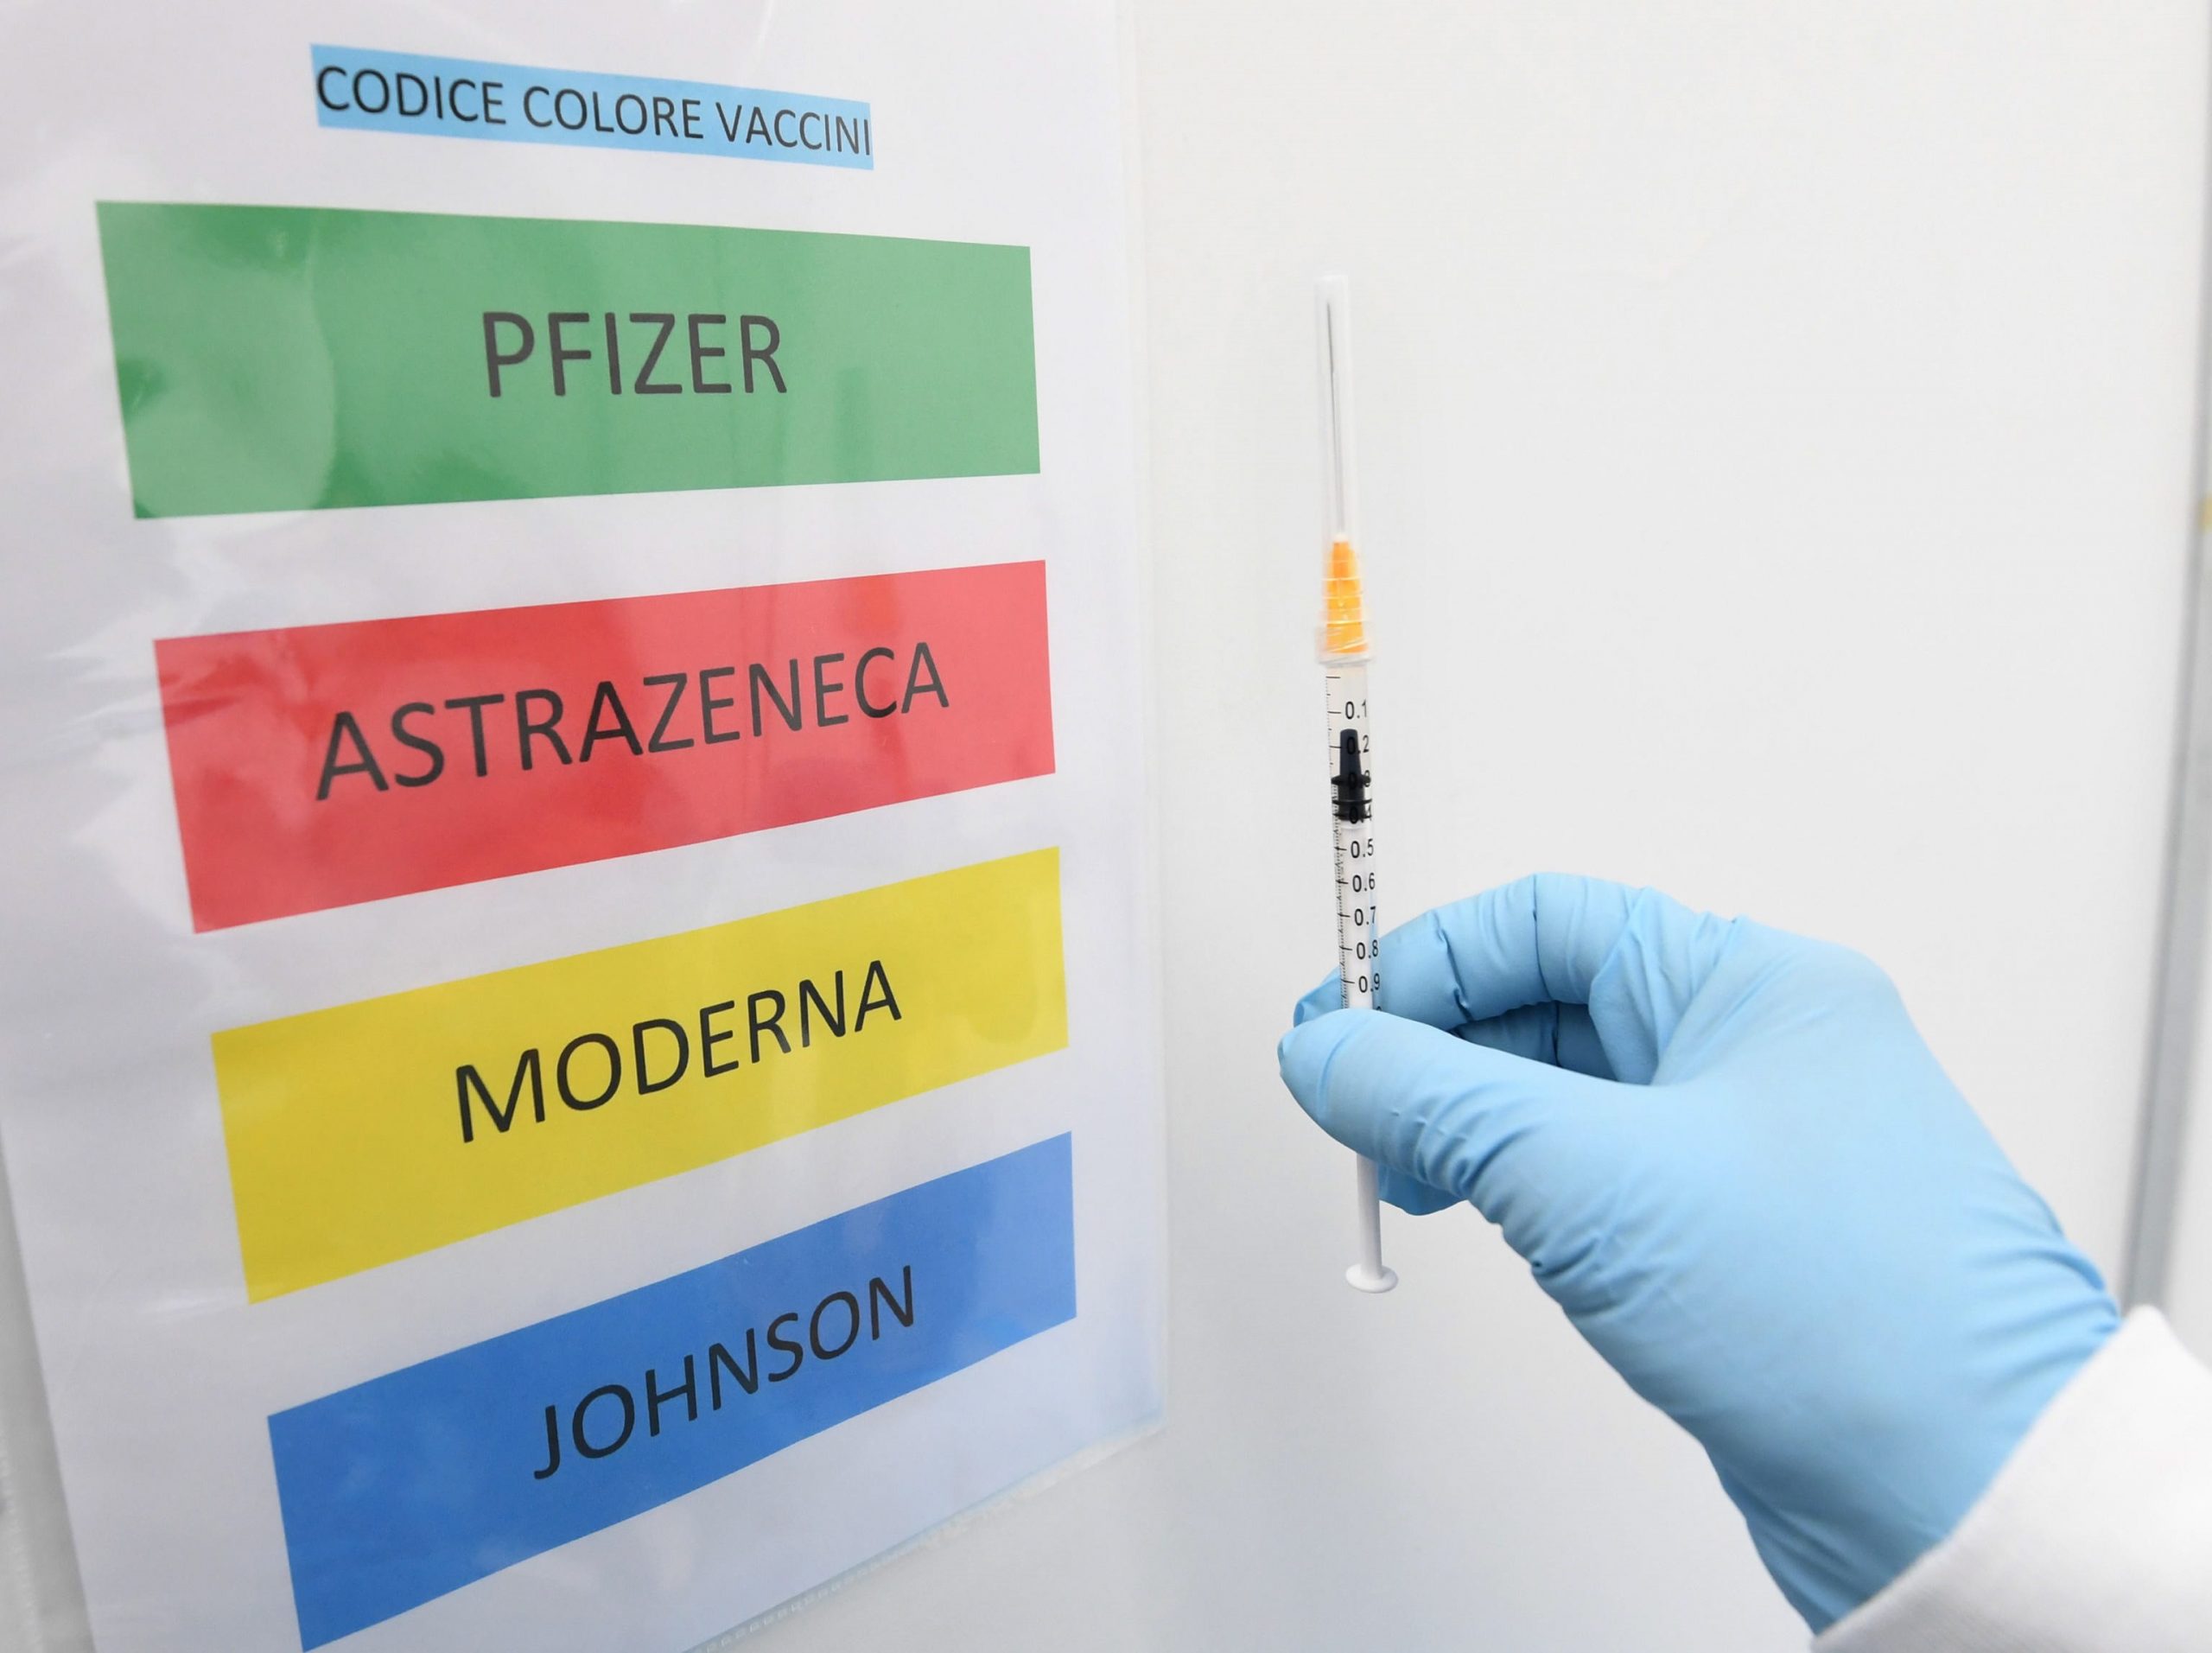 epa09170062 A medical staff holds a syringe next to a color code sign listing the Covid-19 vaccines BioNTech/Pfizer, AstraZeneca, Moderna and Johnson&Johnson at the Covid-19 vaccination hub set up in Novegro, near Milan, Italy, 30 April 2021.  EPA/Daniel Dal Zennaro